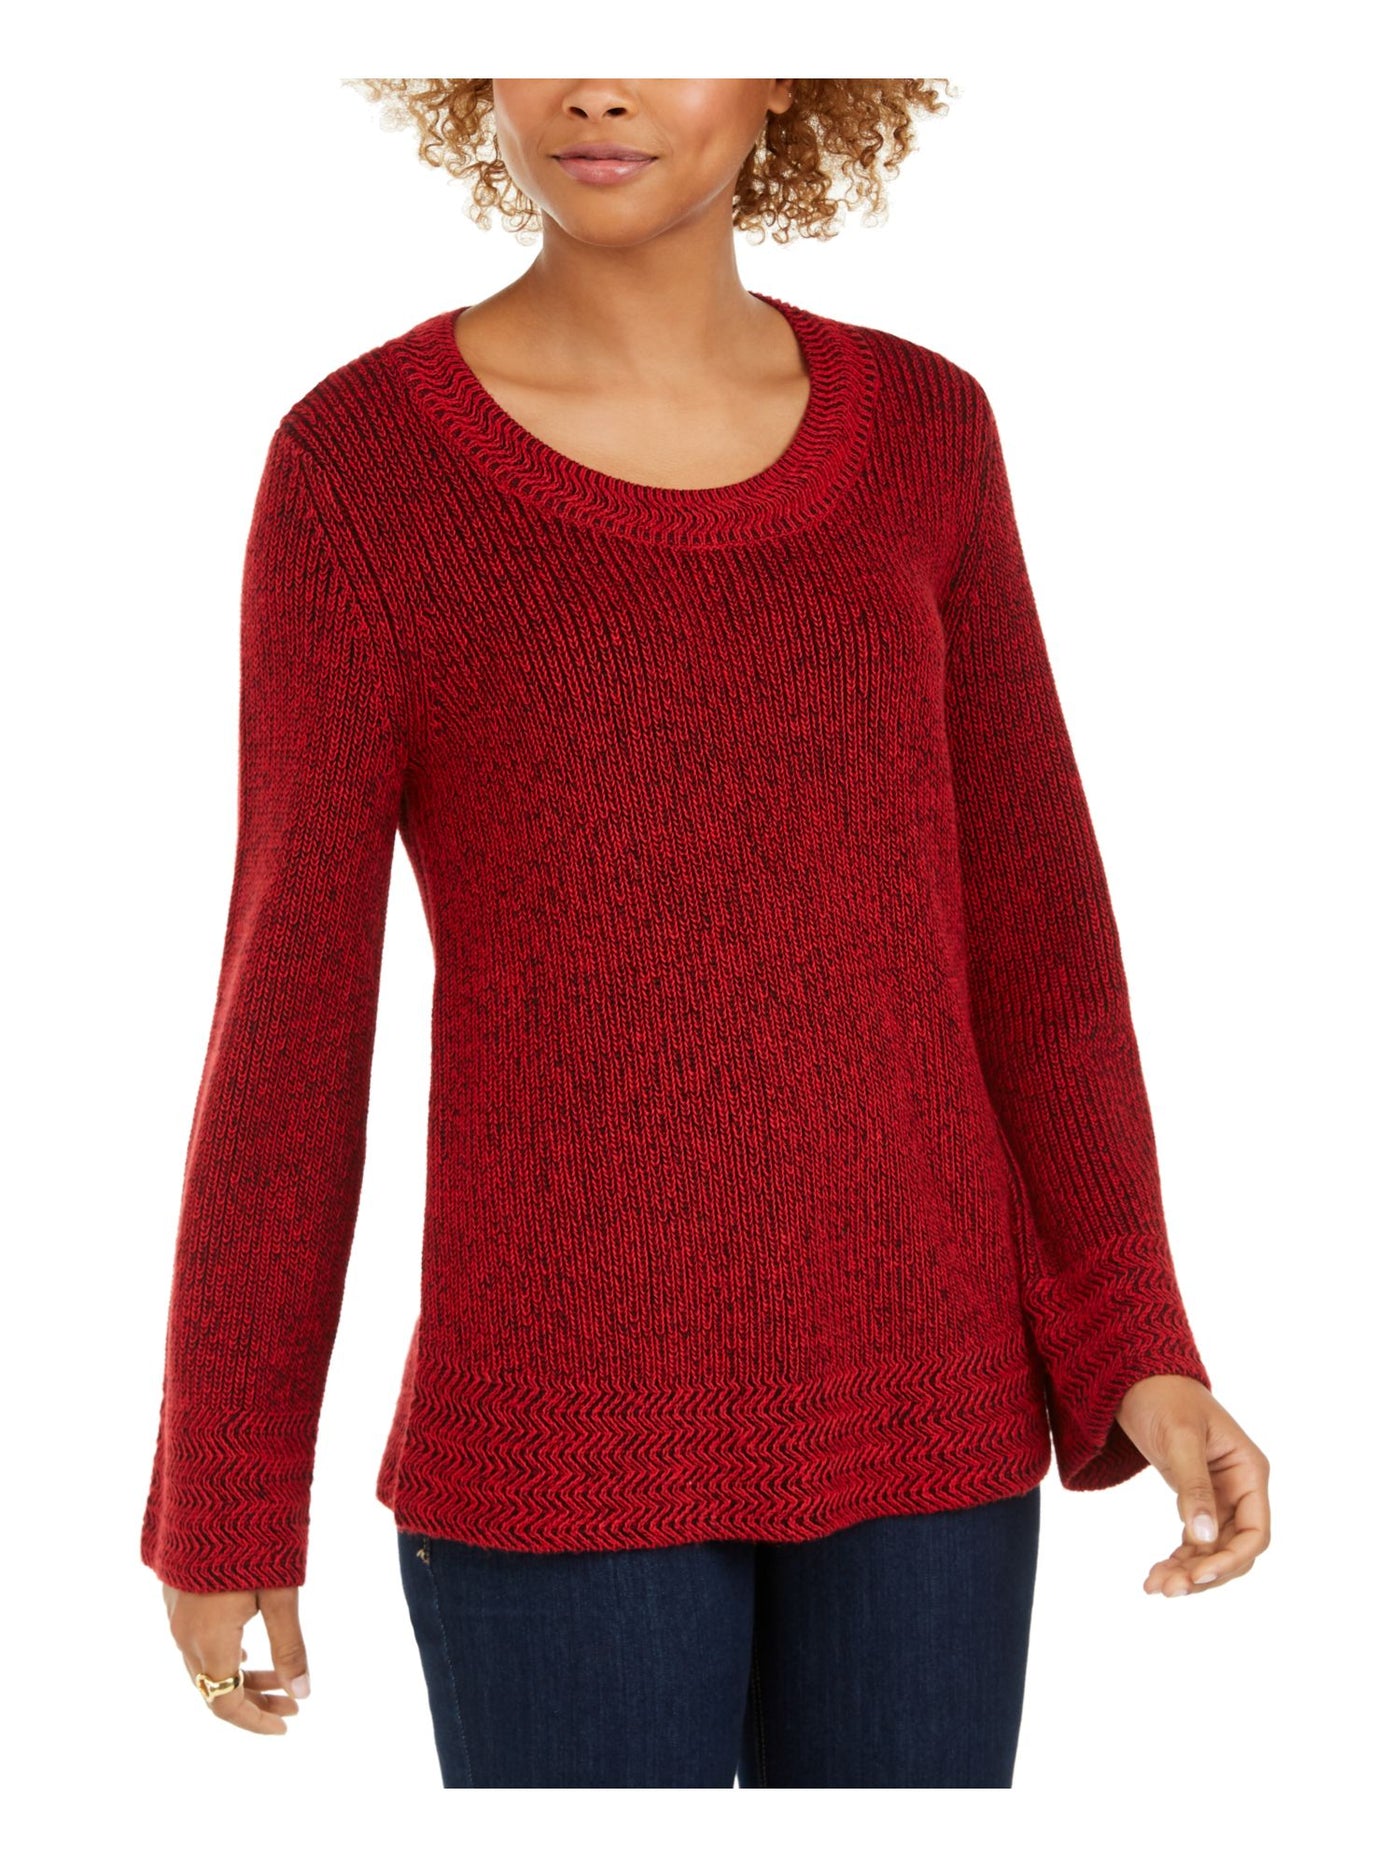 STYLE & COMPANY Womens Red Printed Long Sleeve Top Petites Size: PXL